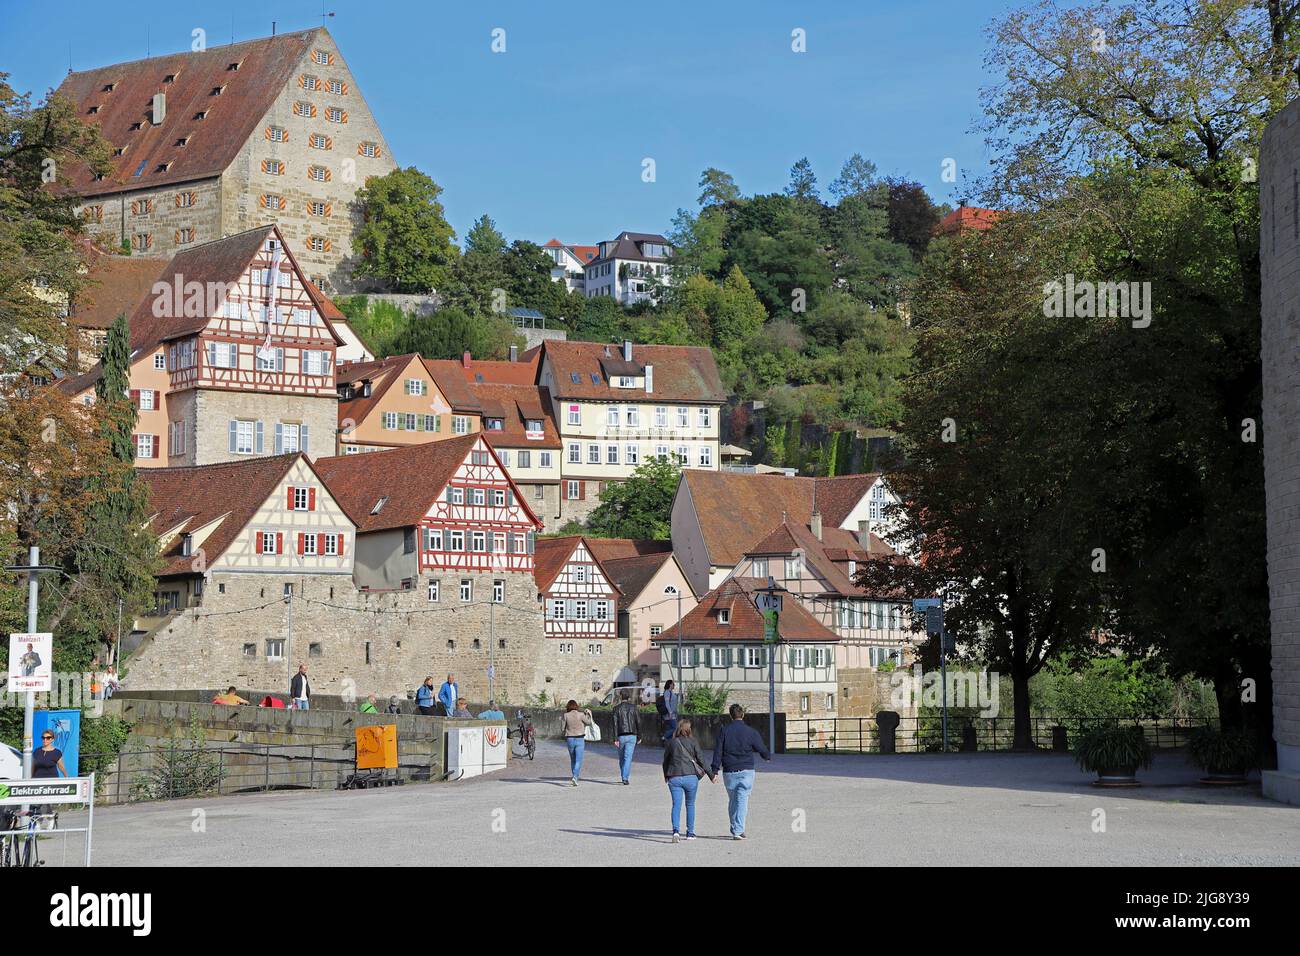 Germany, Baden-Wuerttemberg, Schwäbisch Hall, on the banks of the Kocher river Stock Photo